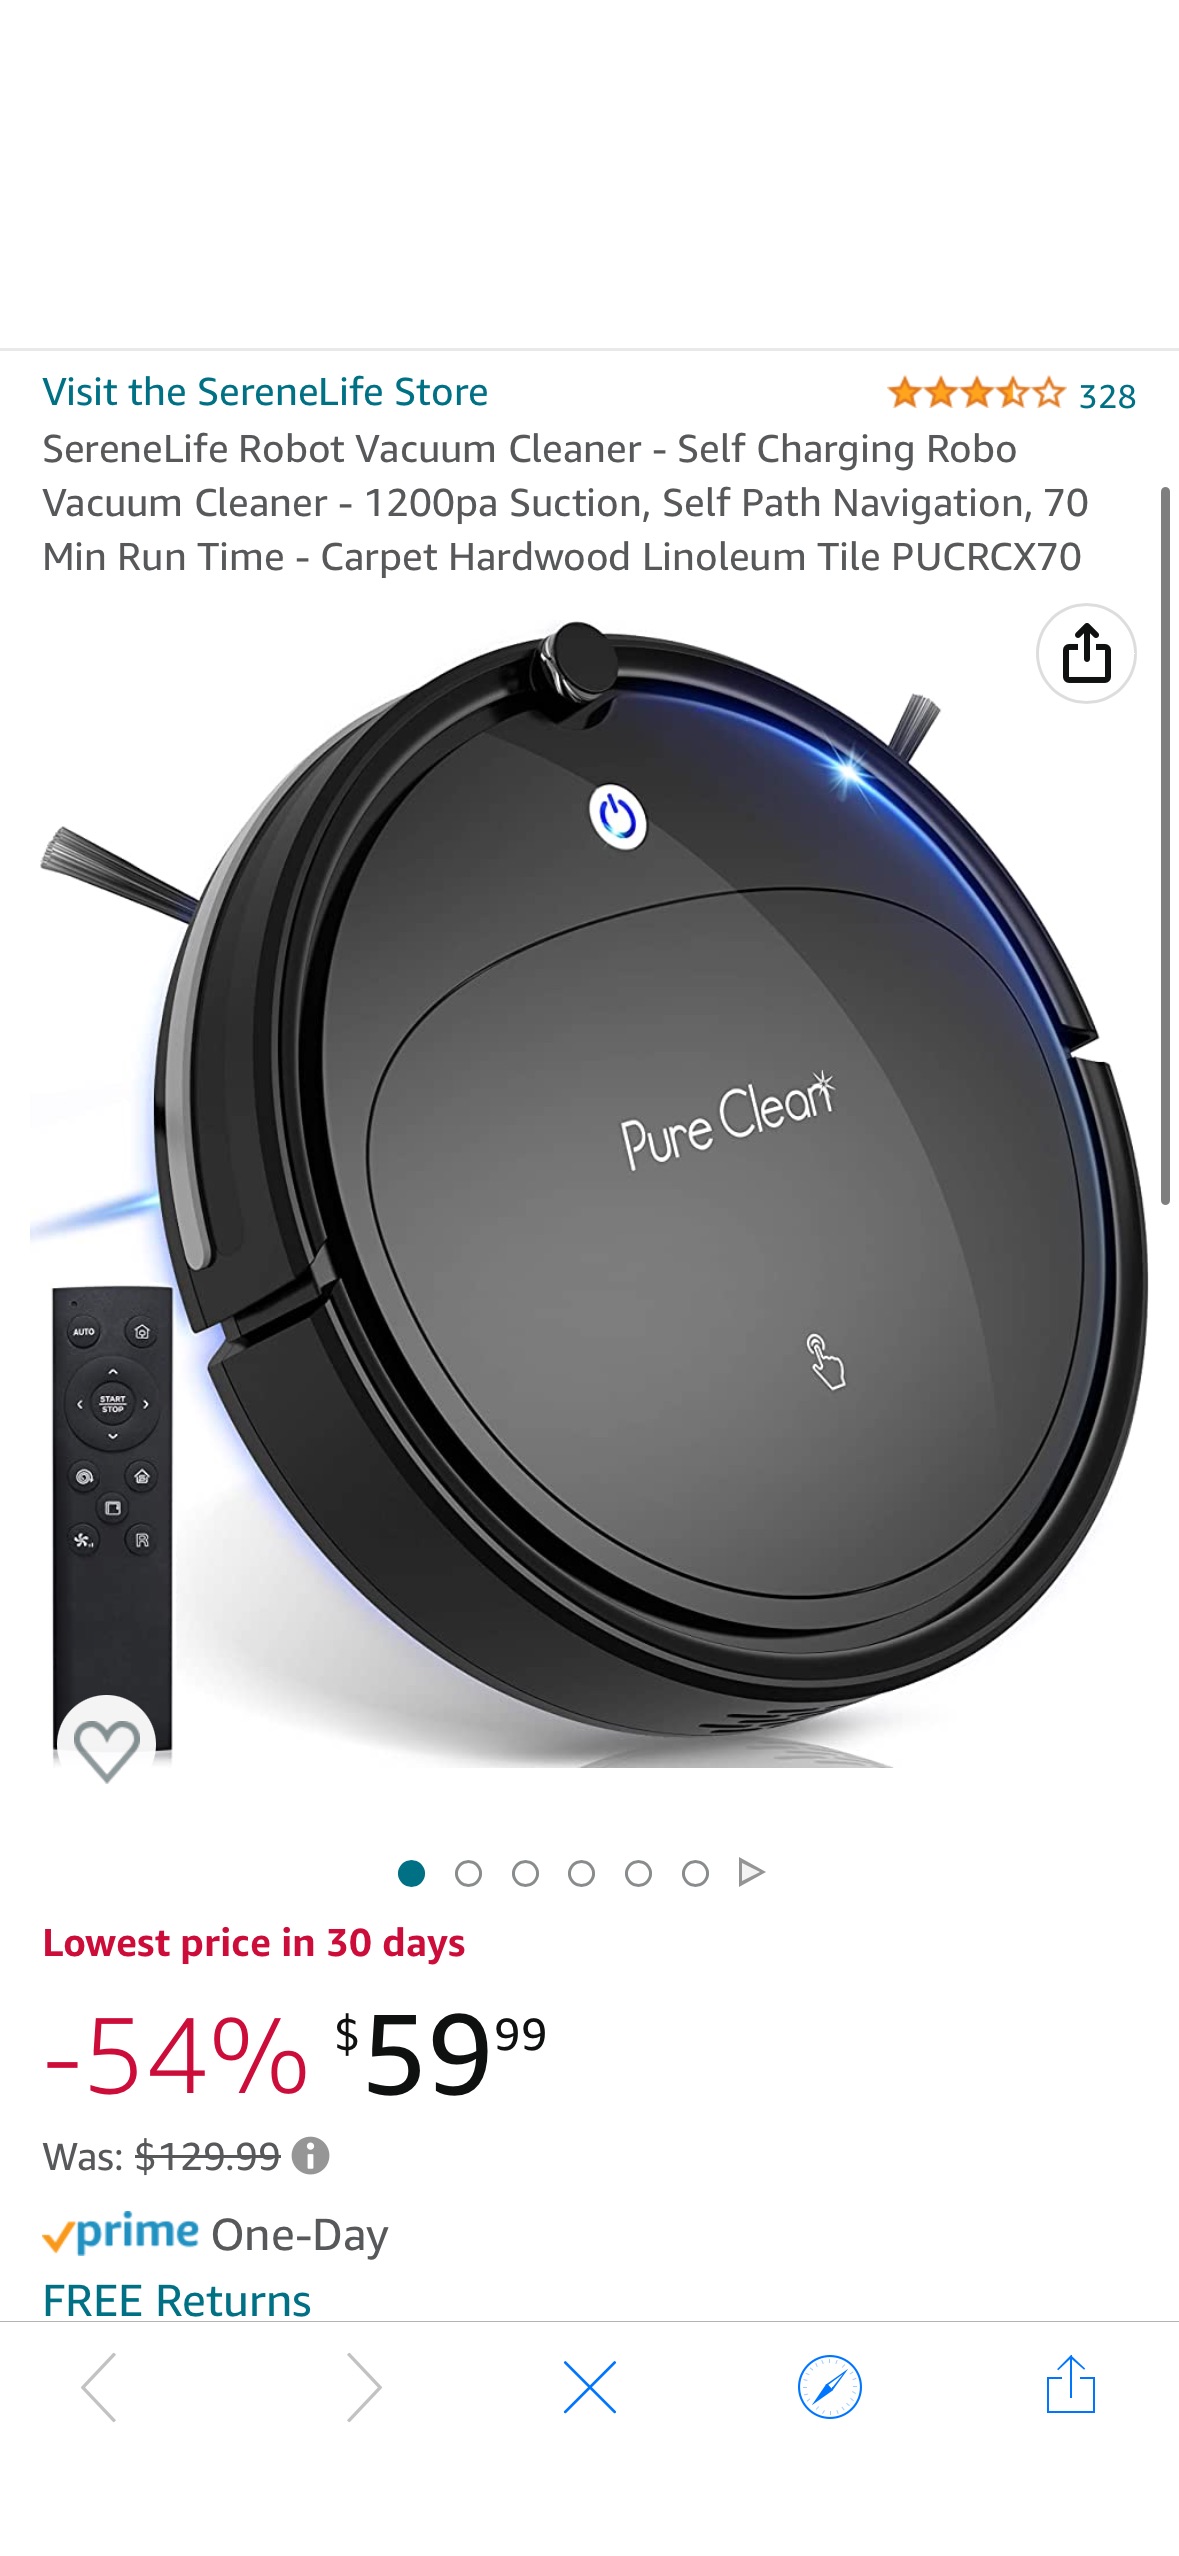 SereneLife Robot Vacuum Cleaner - Self Charging Robo Vacuum Cleaner - 1200pa Suction, Self Path Navigation